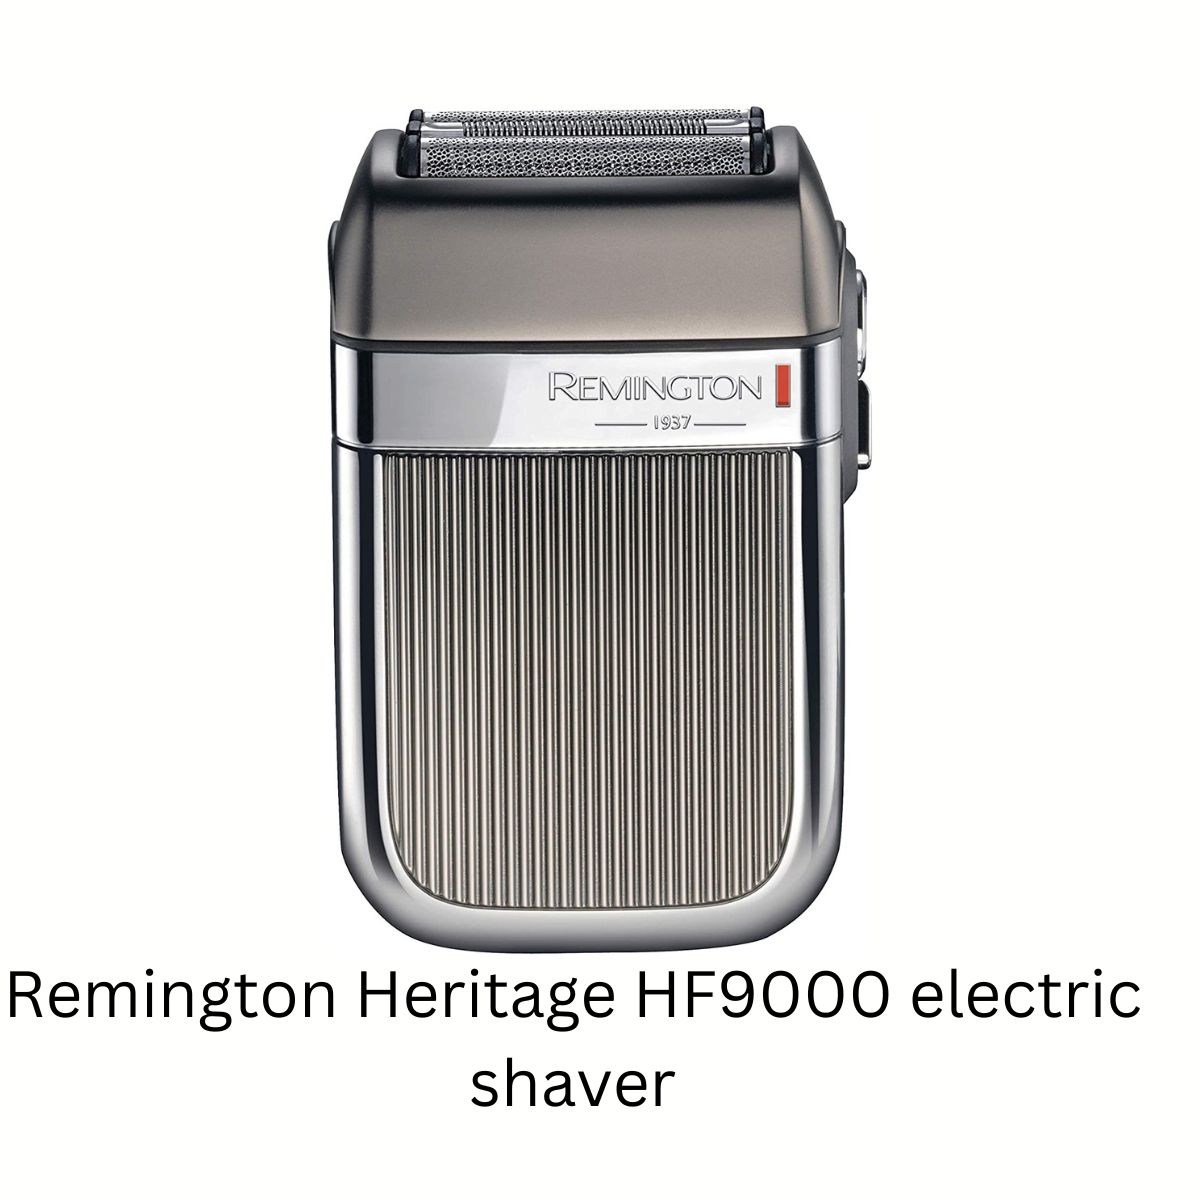 front view of the retro Remington Heritage HF9000 electric shaver